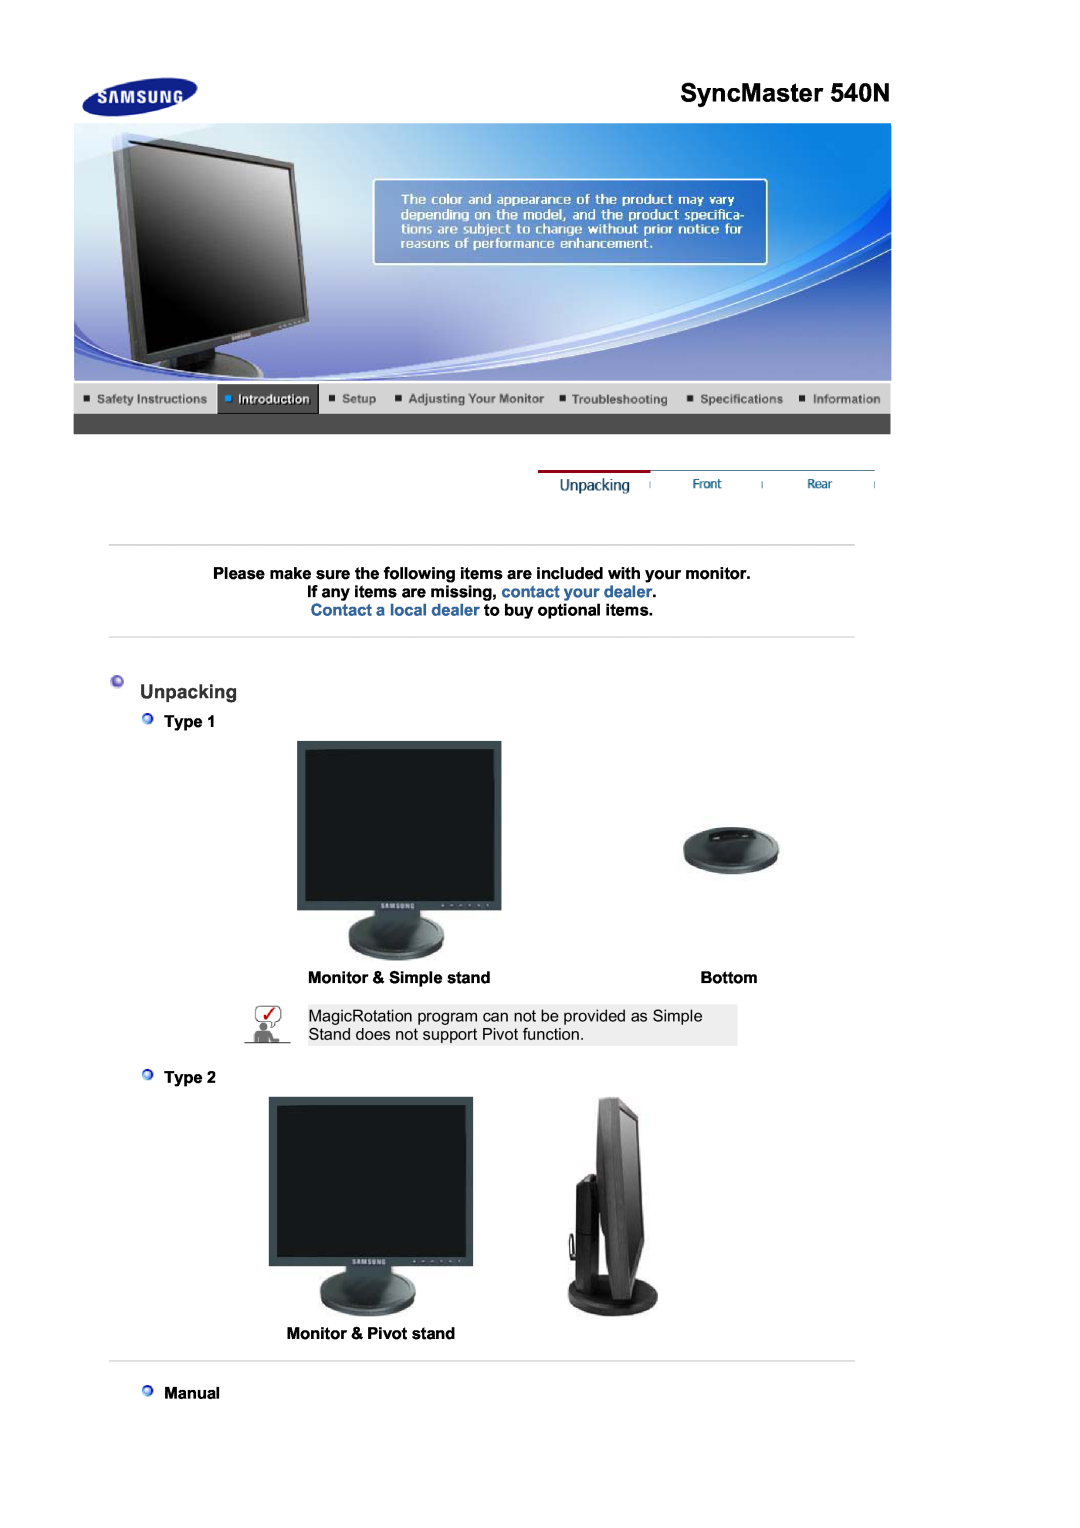 Samsung 740T SyncMaster 540N, Unpacking, Please make sure the following items are included with your monitor, Type, Bottom 